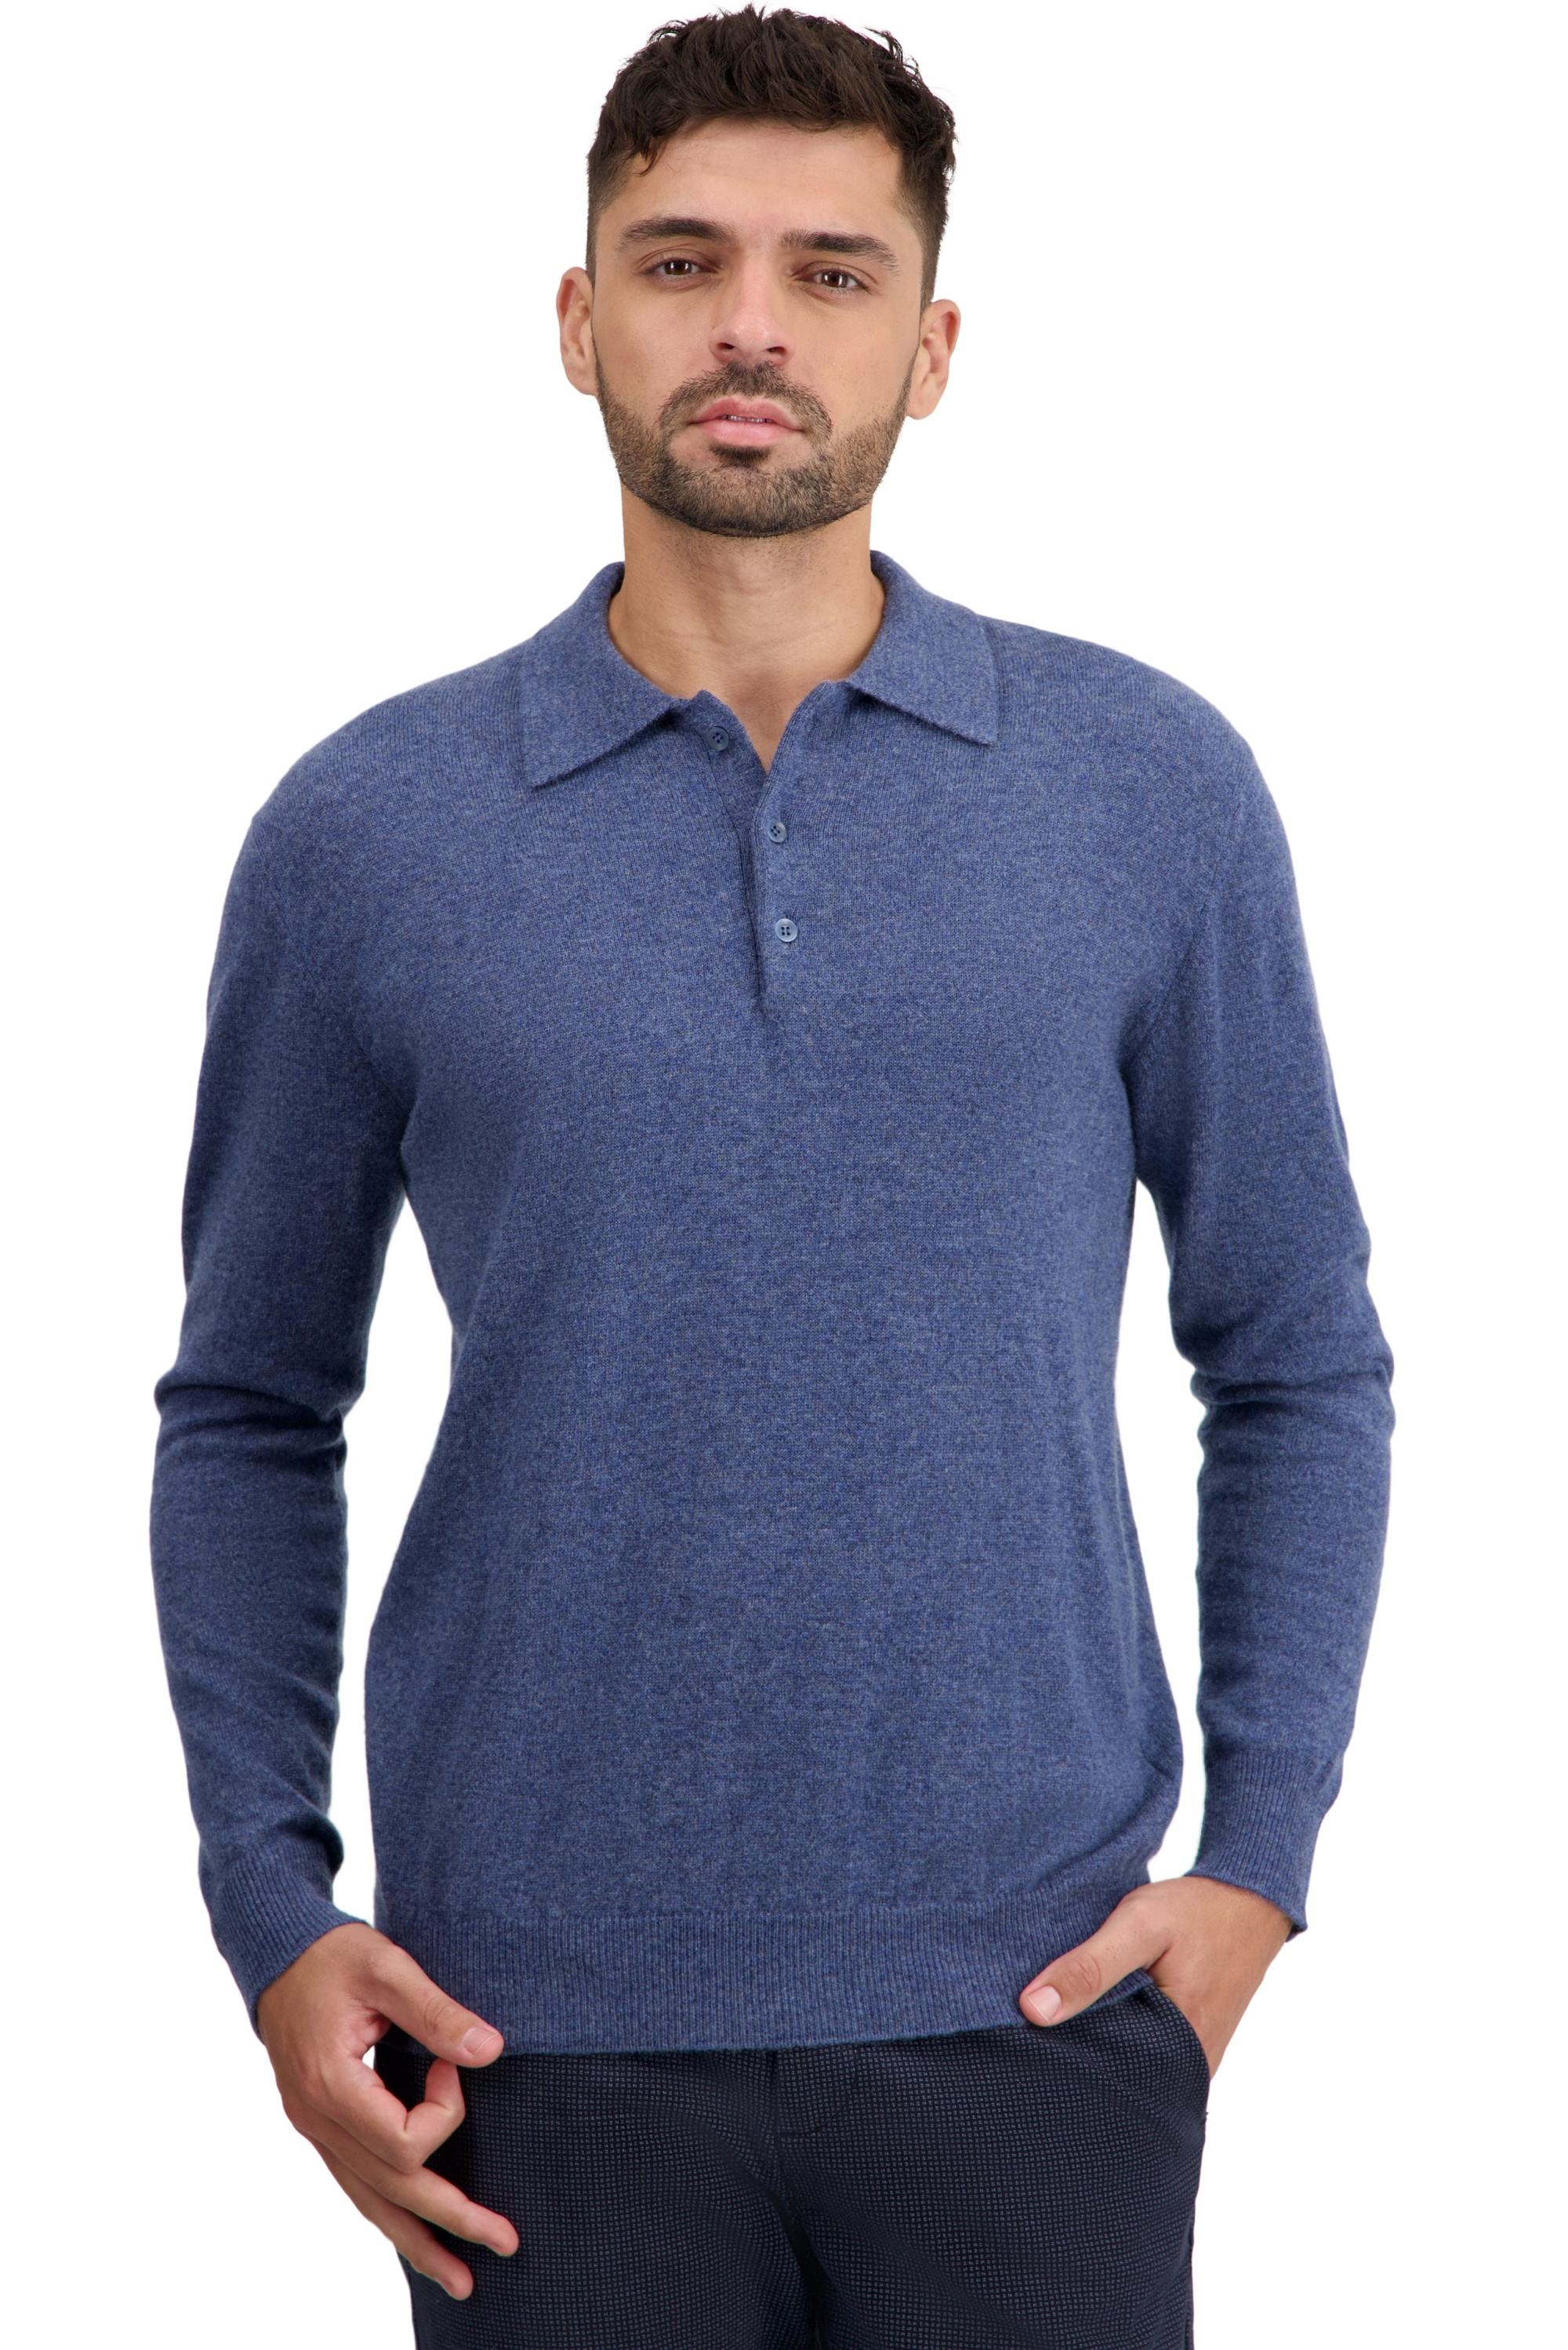 Cashmere men basic sweaters at low prices tarn first nordic blue 3xl